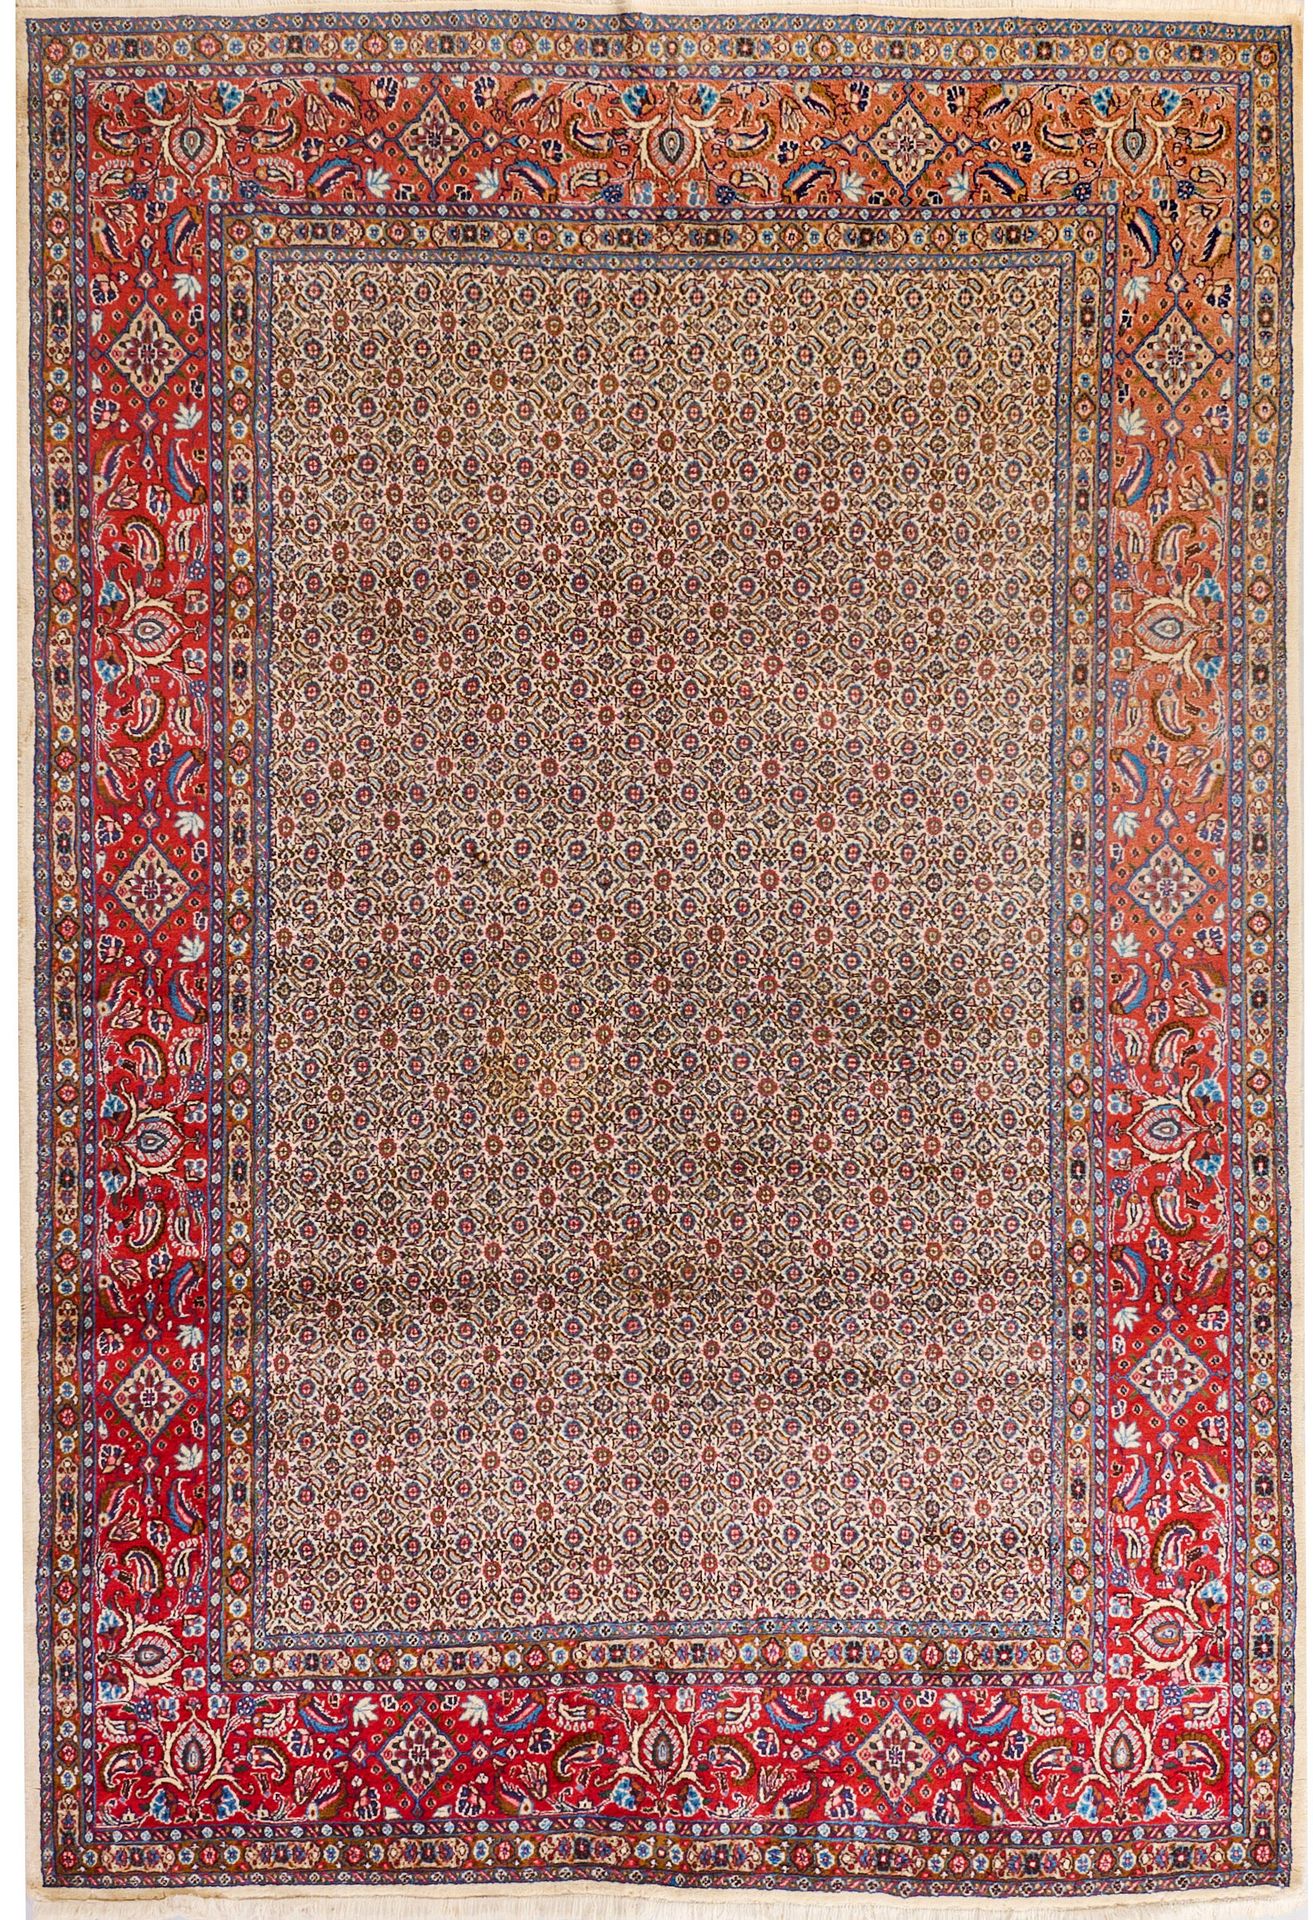 Null Moud rug Persia. Wool on cotton. The ivory-colored central field is densely&hellip;